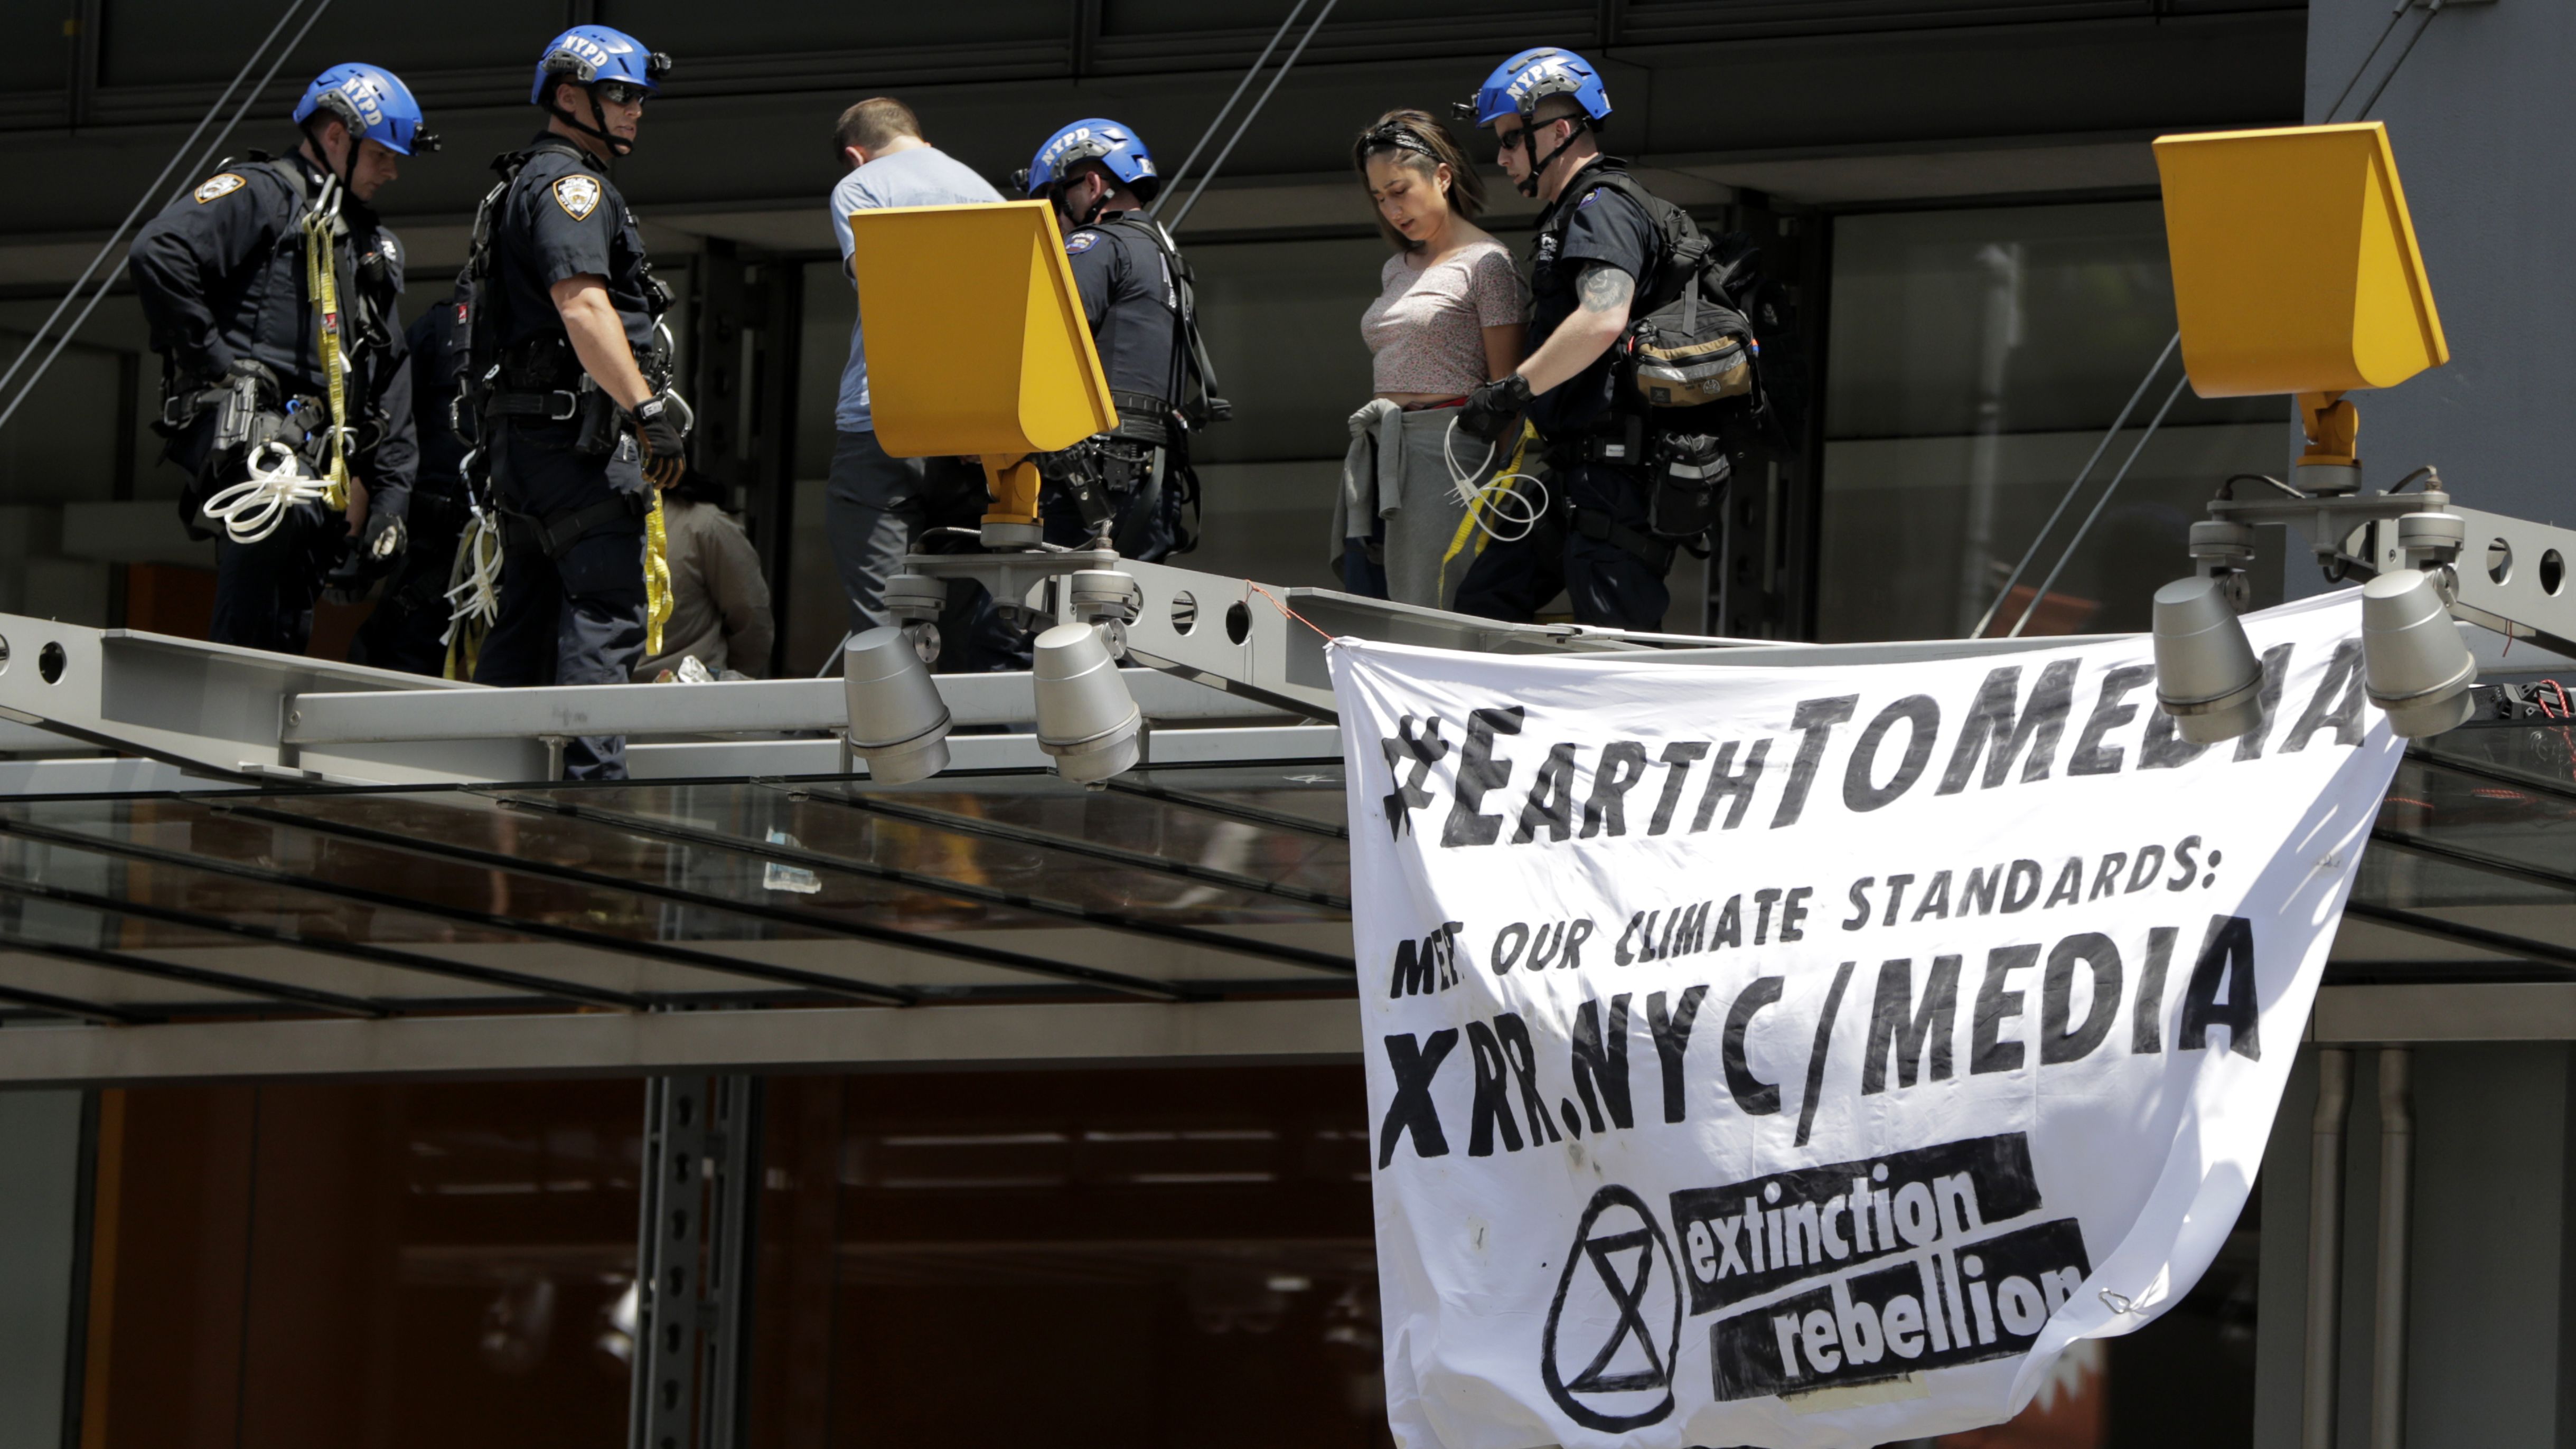 New York Police officers take into custody activists who climbed on the awning of the New York Times building to hang signs during a climate change rally, Saturday, June 22, 2019, in New York.